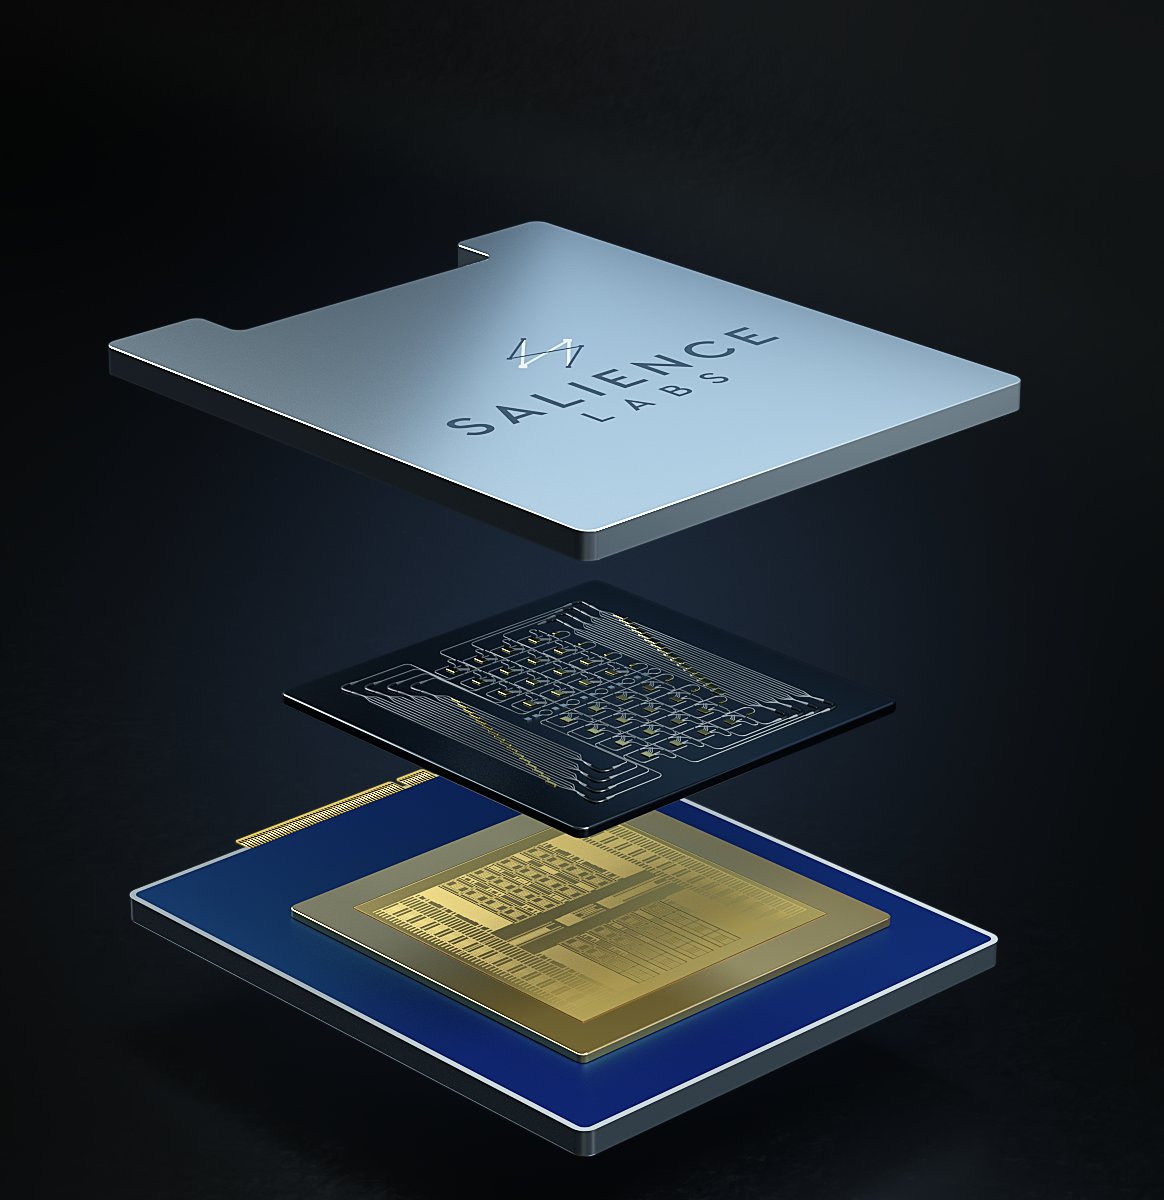 Congratulations to our enterprise, @saliencelabs! The team has raised $11.5 million in seed funding to develop an ultra high-speed multi-chip processor combining photonics and electronics to accelerate exponential advances in AI. Find out more here ⬇️: bwnews.pr/3L5sqDq